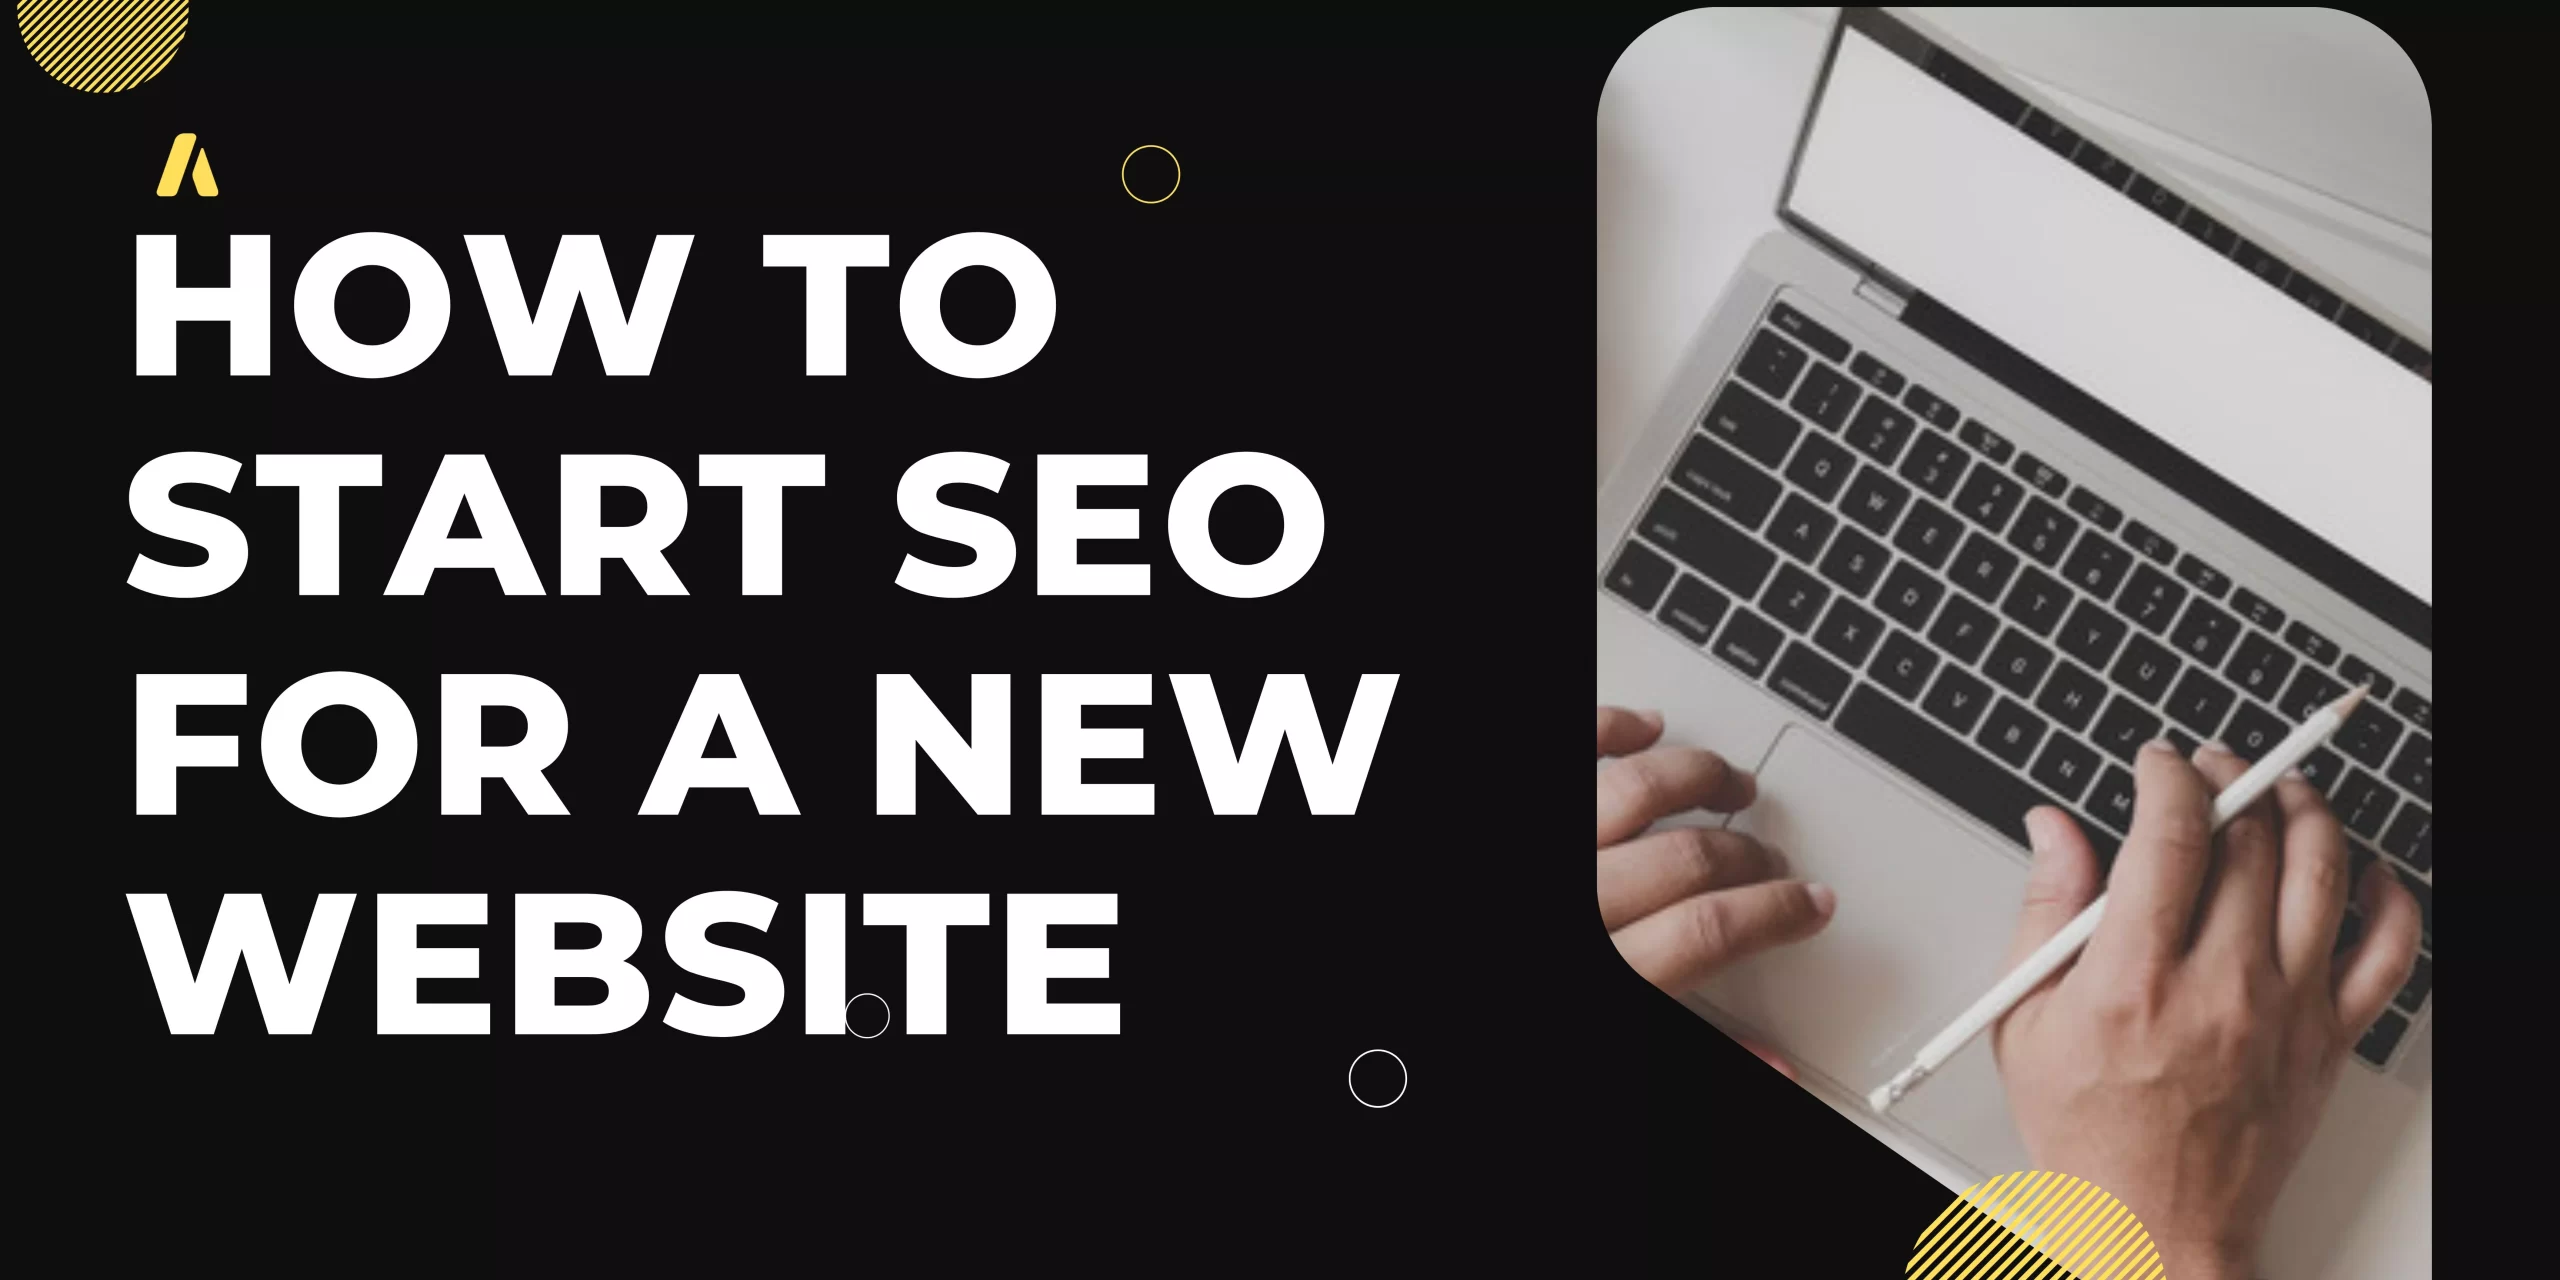 How to Start SEO for a New Website